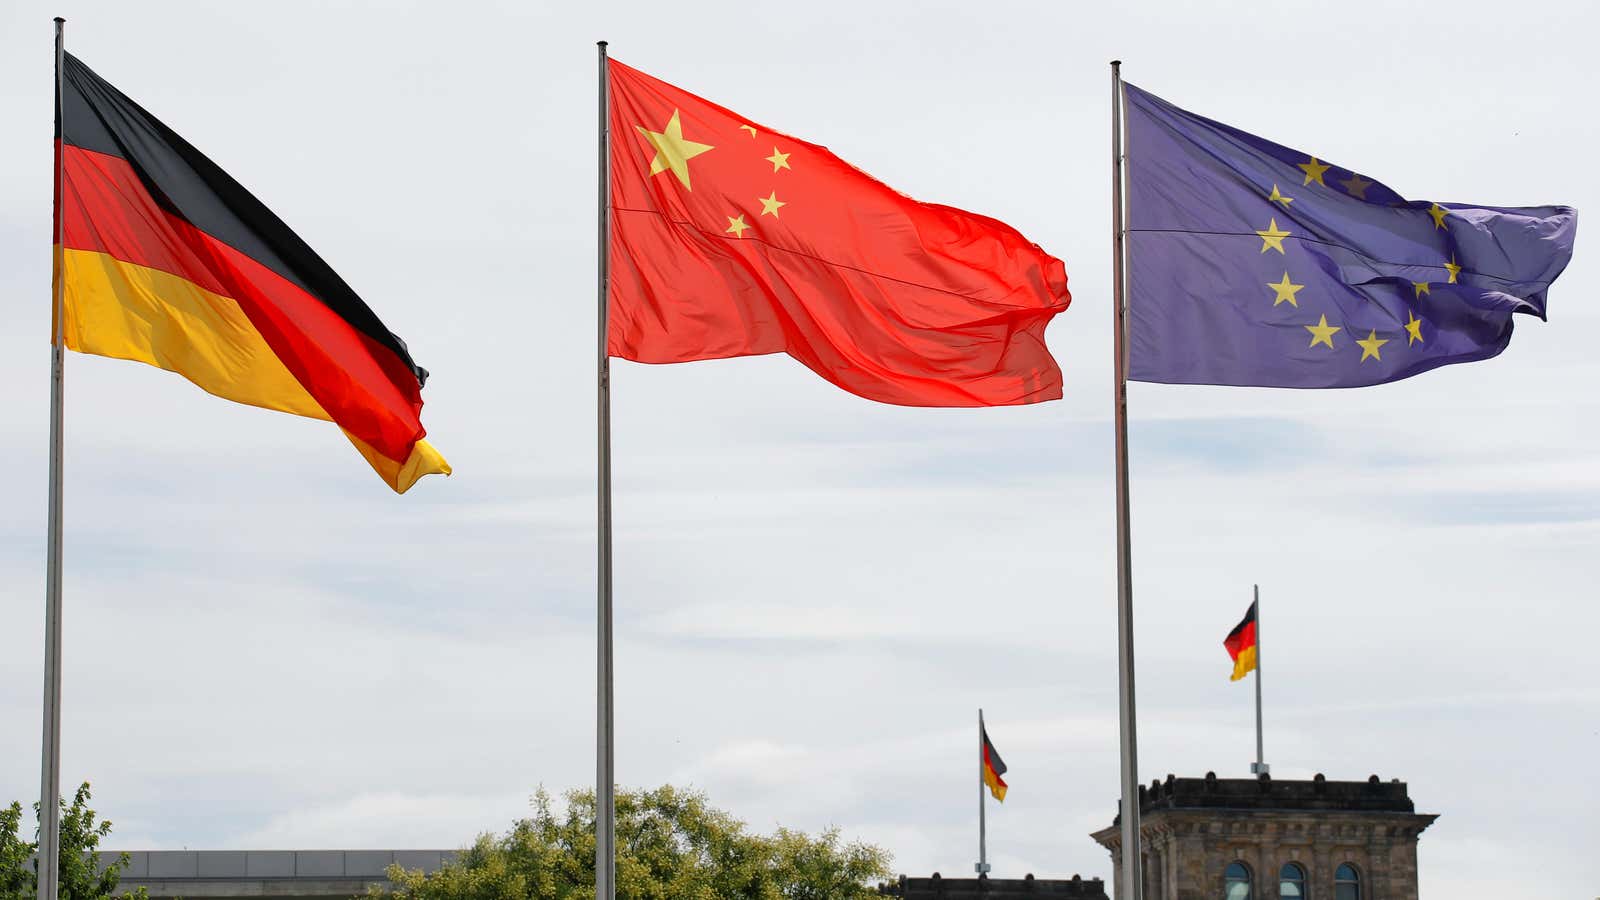 2020 is an important year for the future of the EU-China relationship.